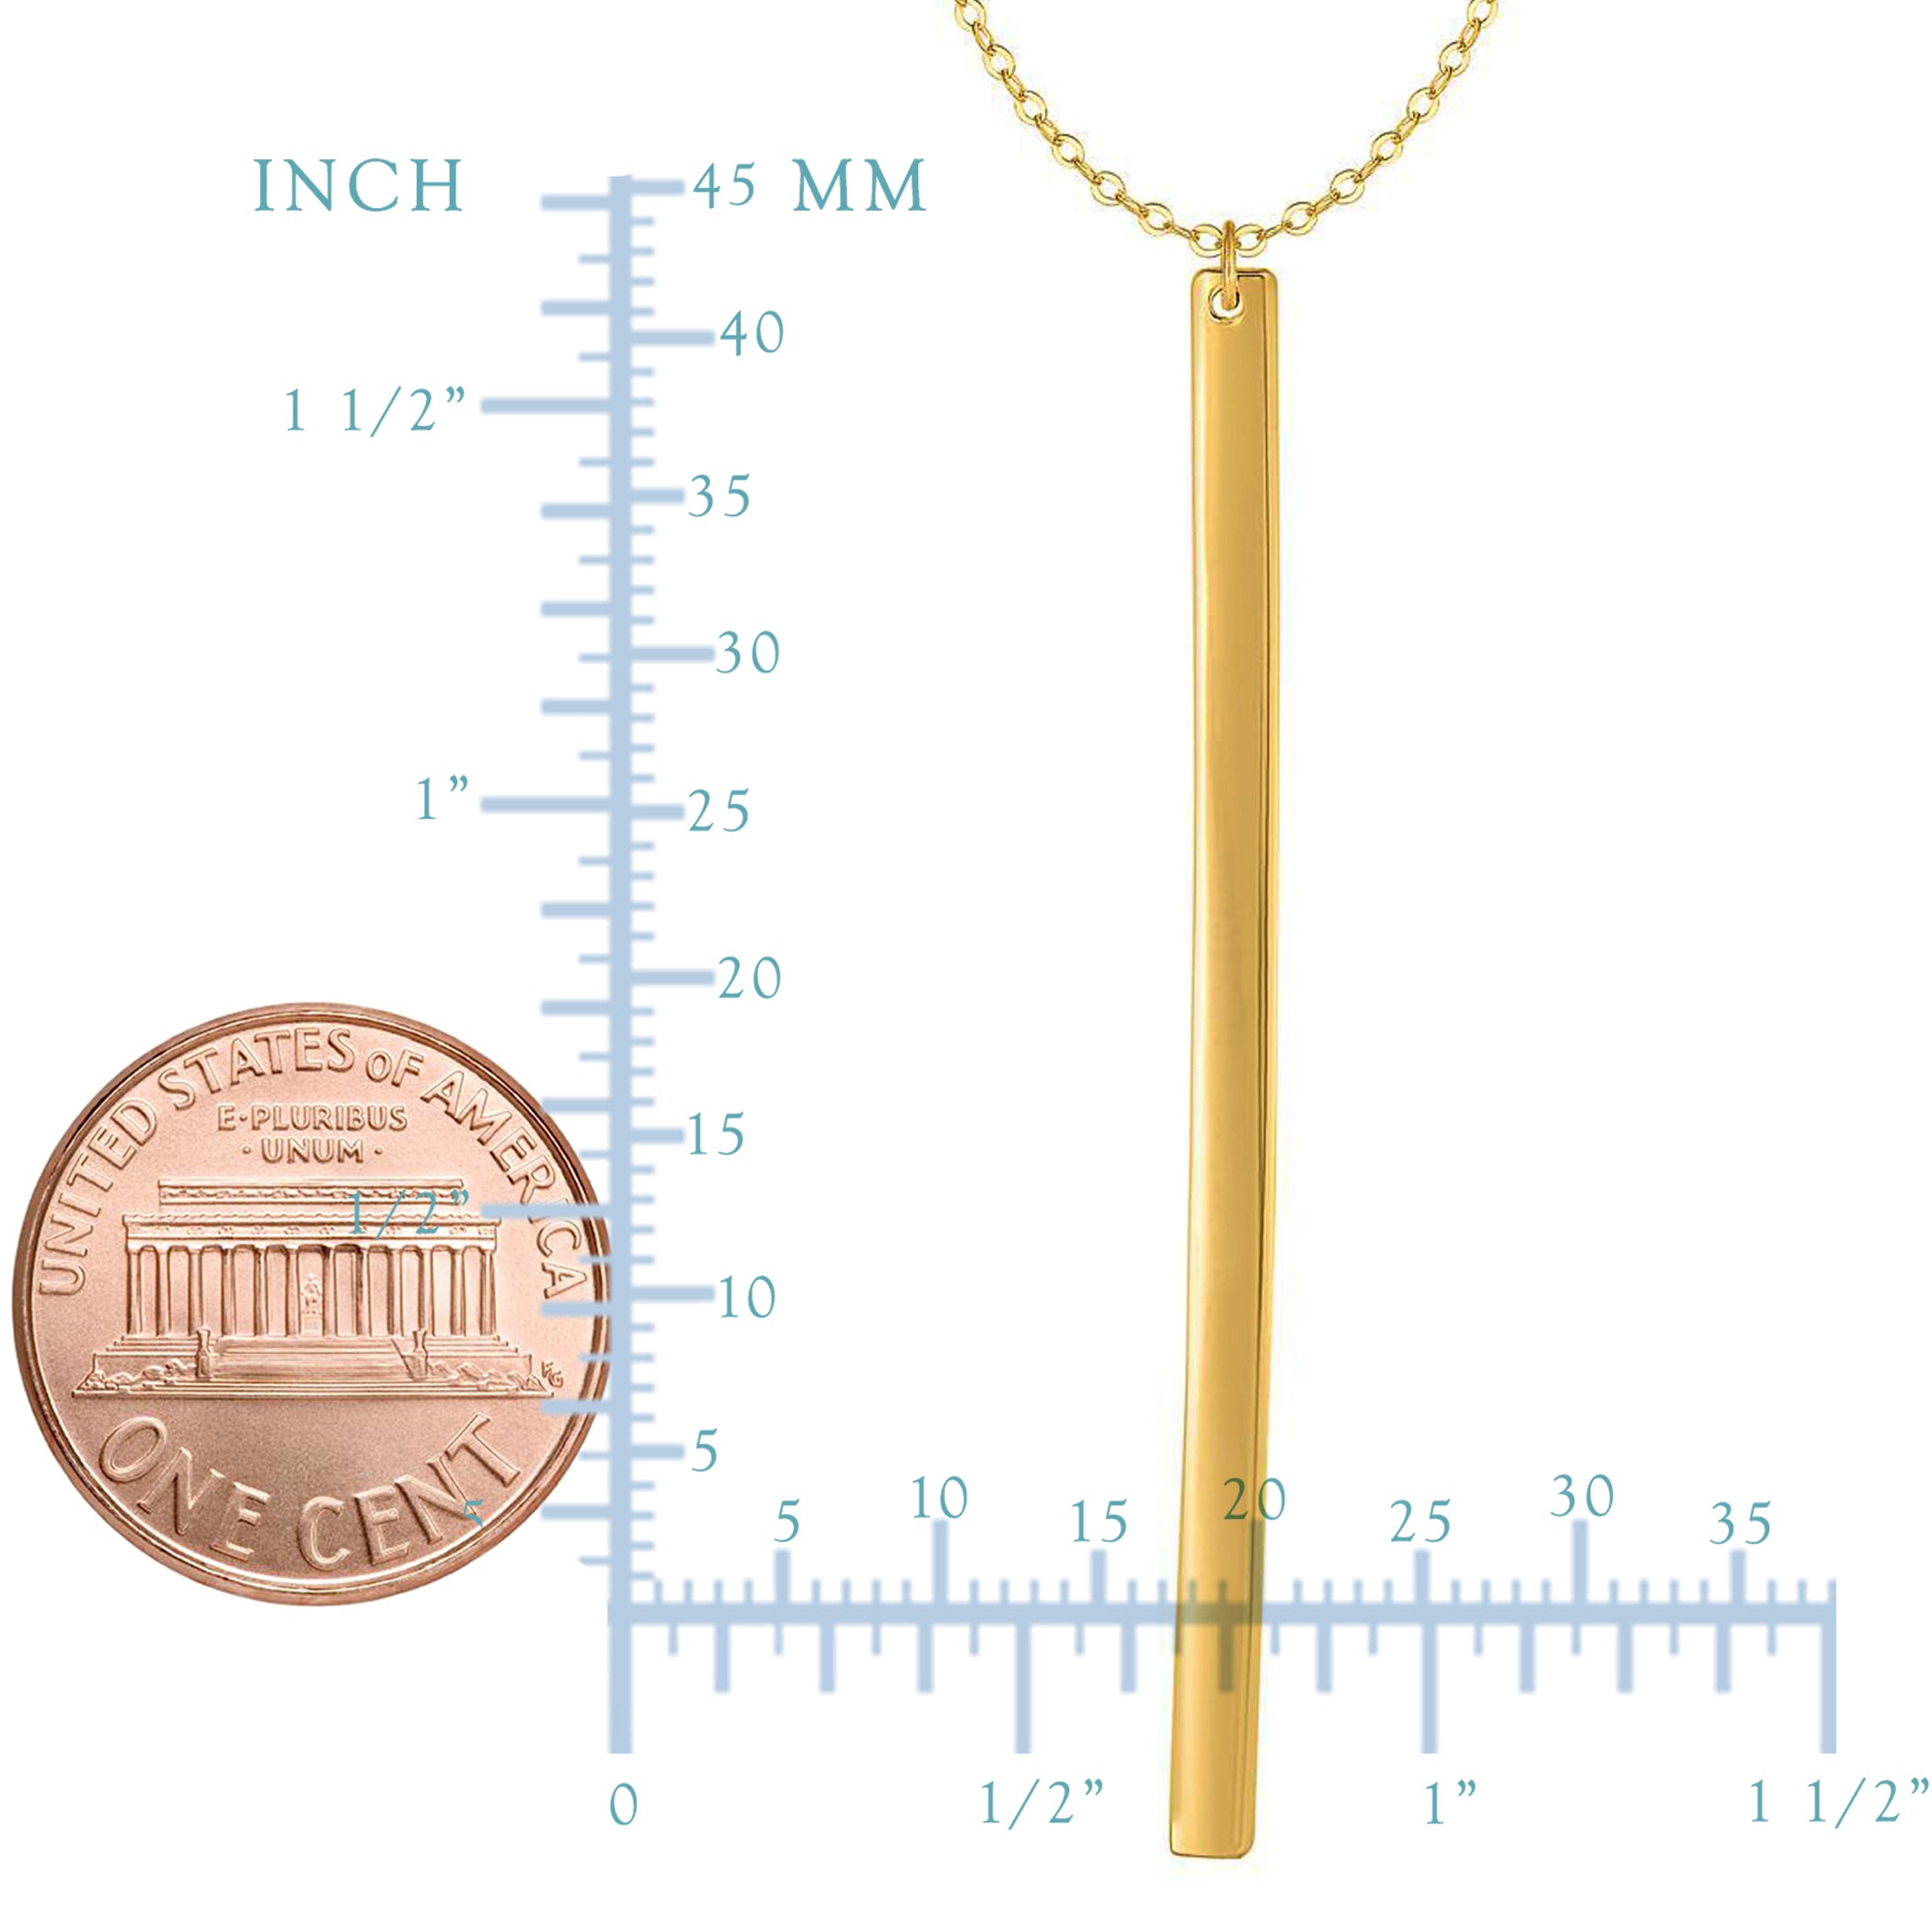 14k Yellow Gold Hanging Bar Necklace, 24" fine designer jewelry for men and women